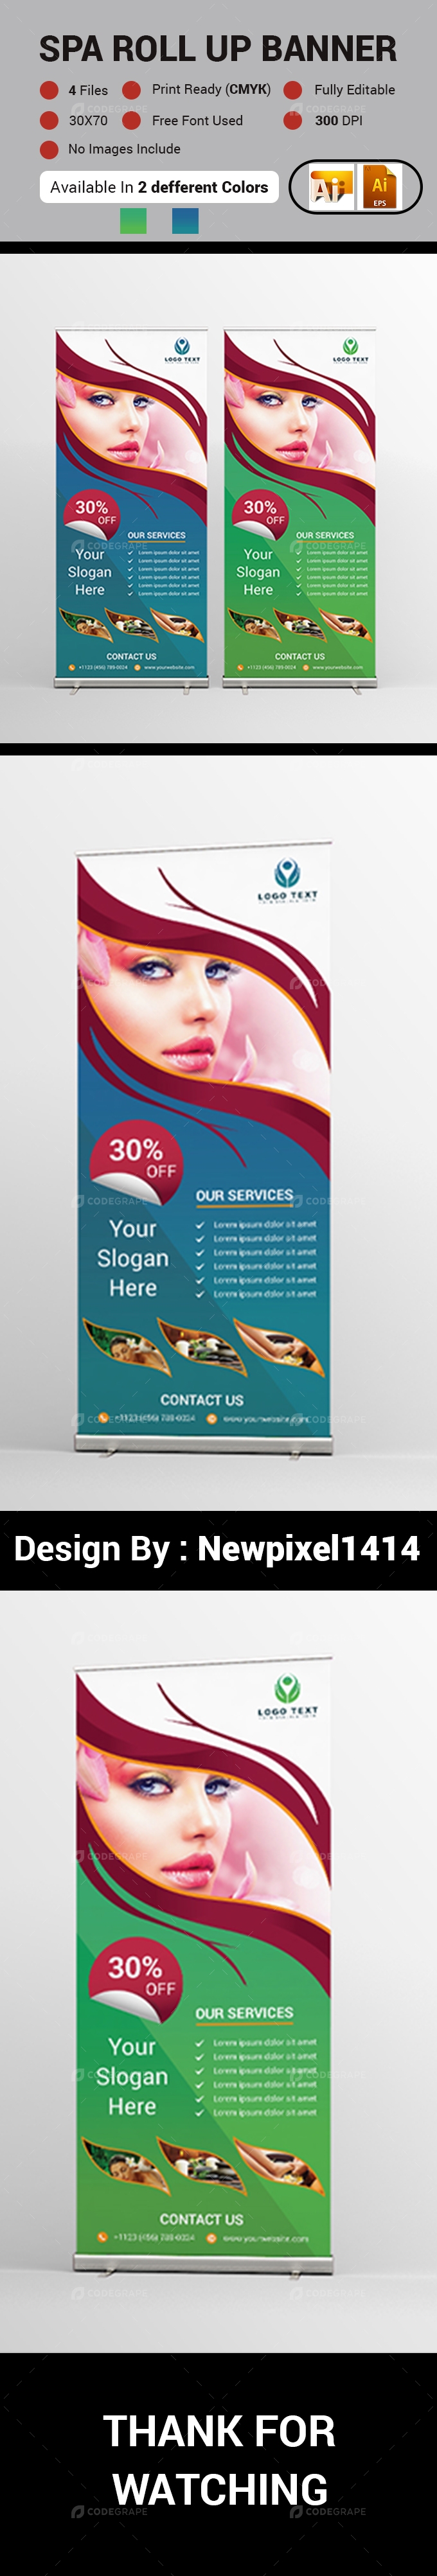 Spa Roll Up Banner